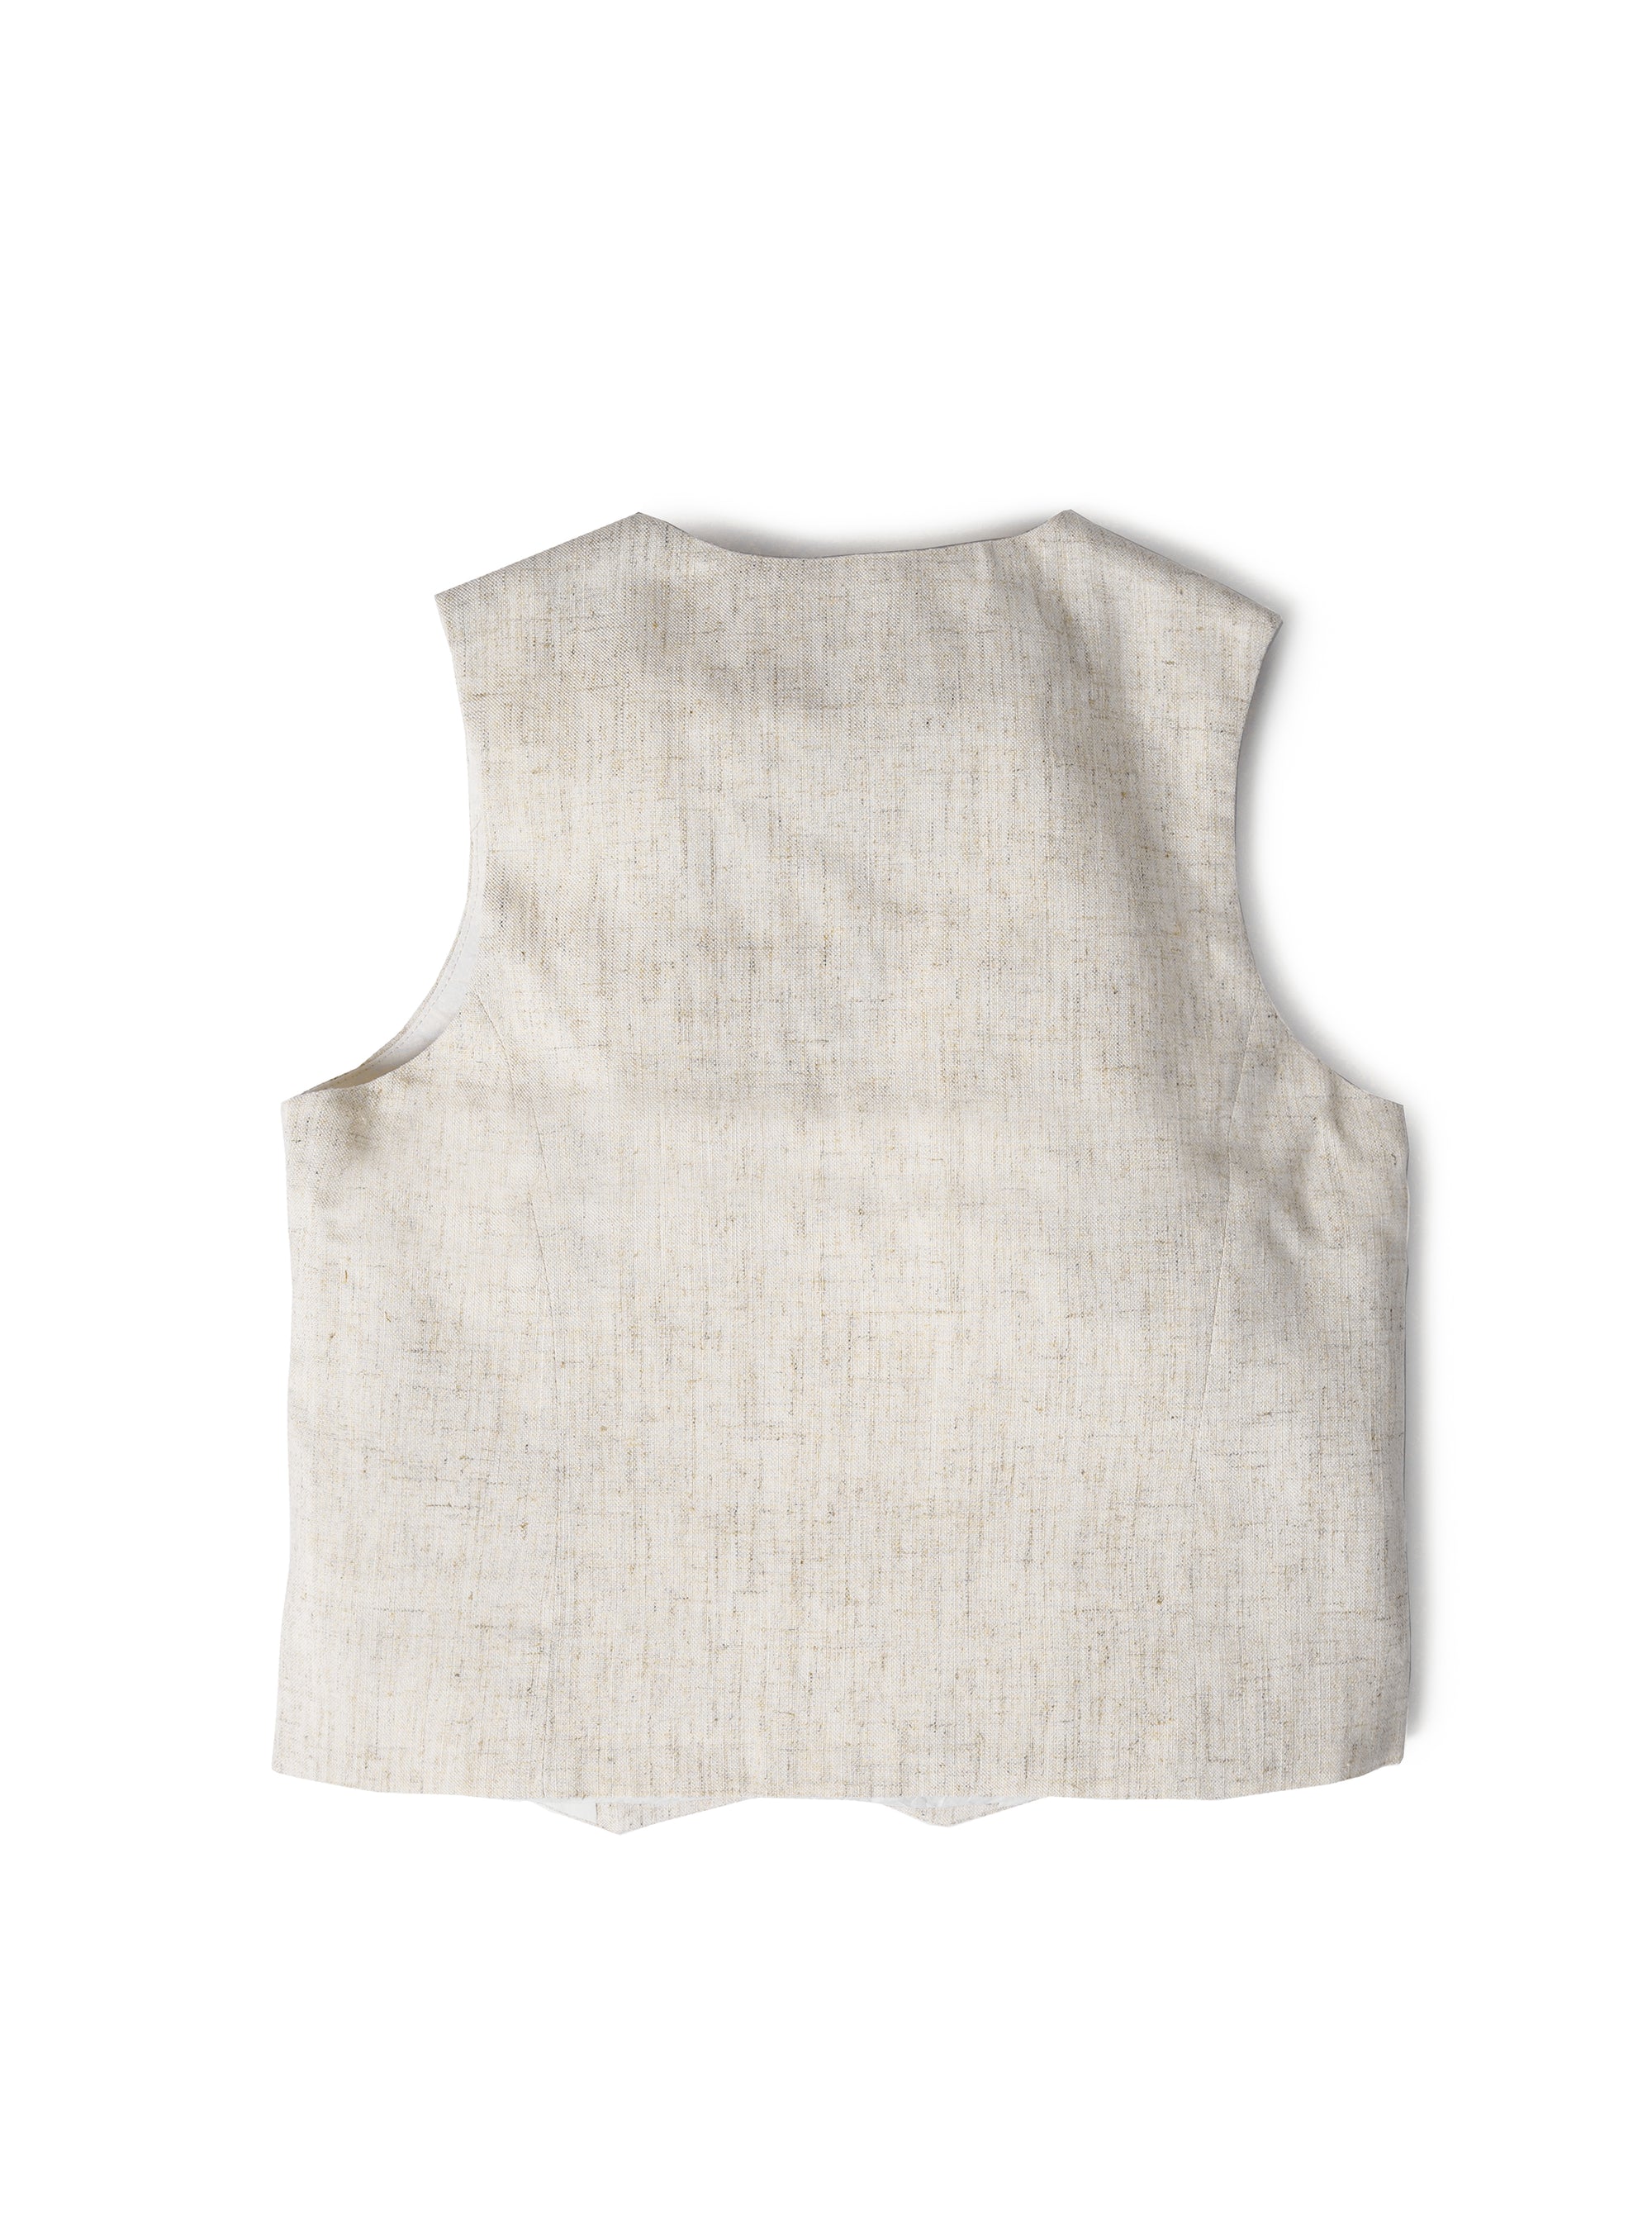 textured sandy beach vest with off white buttons